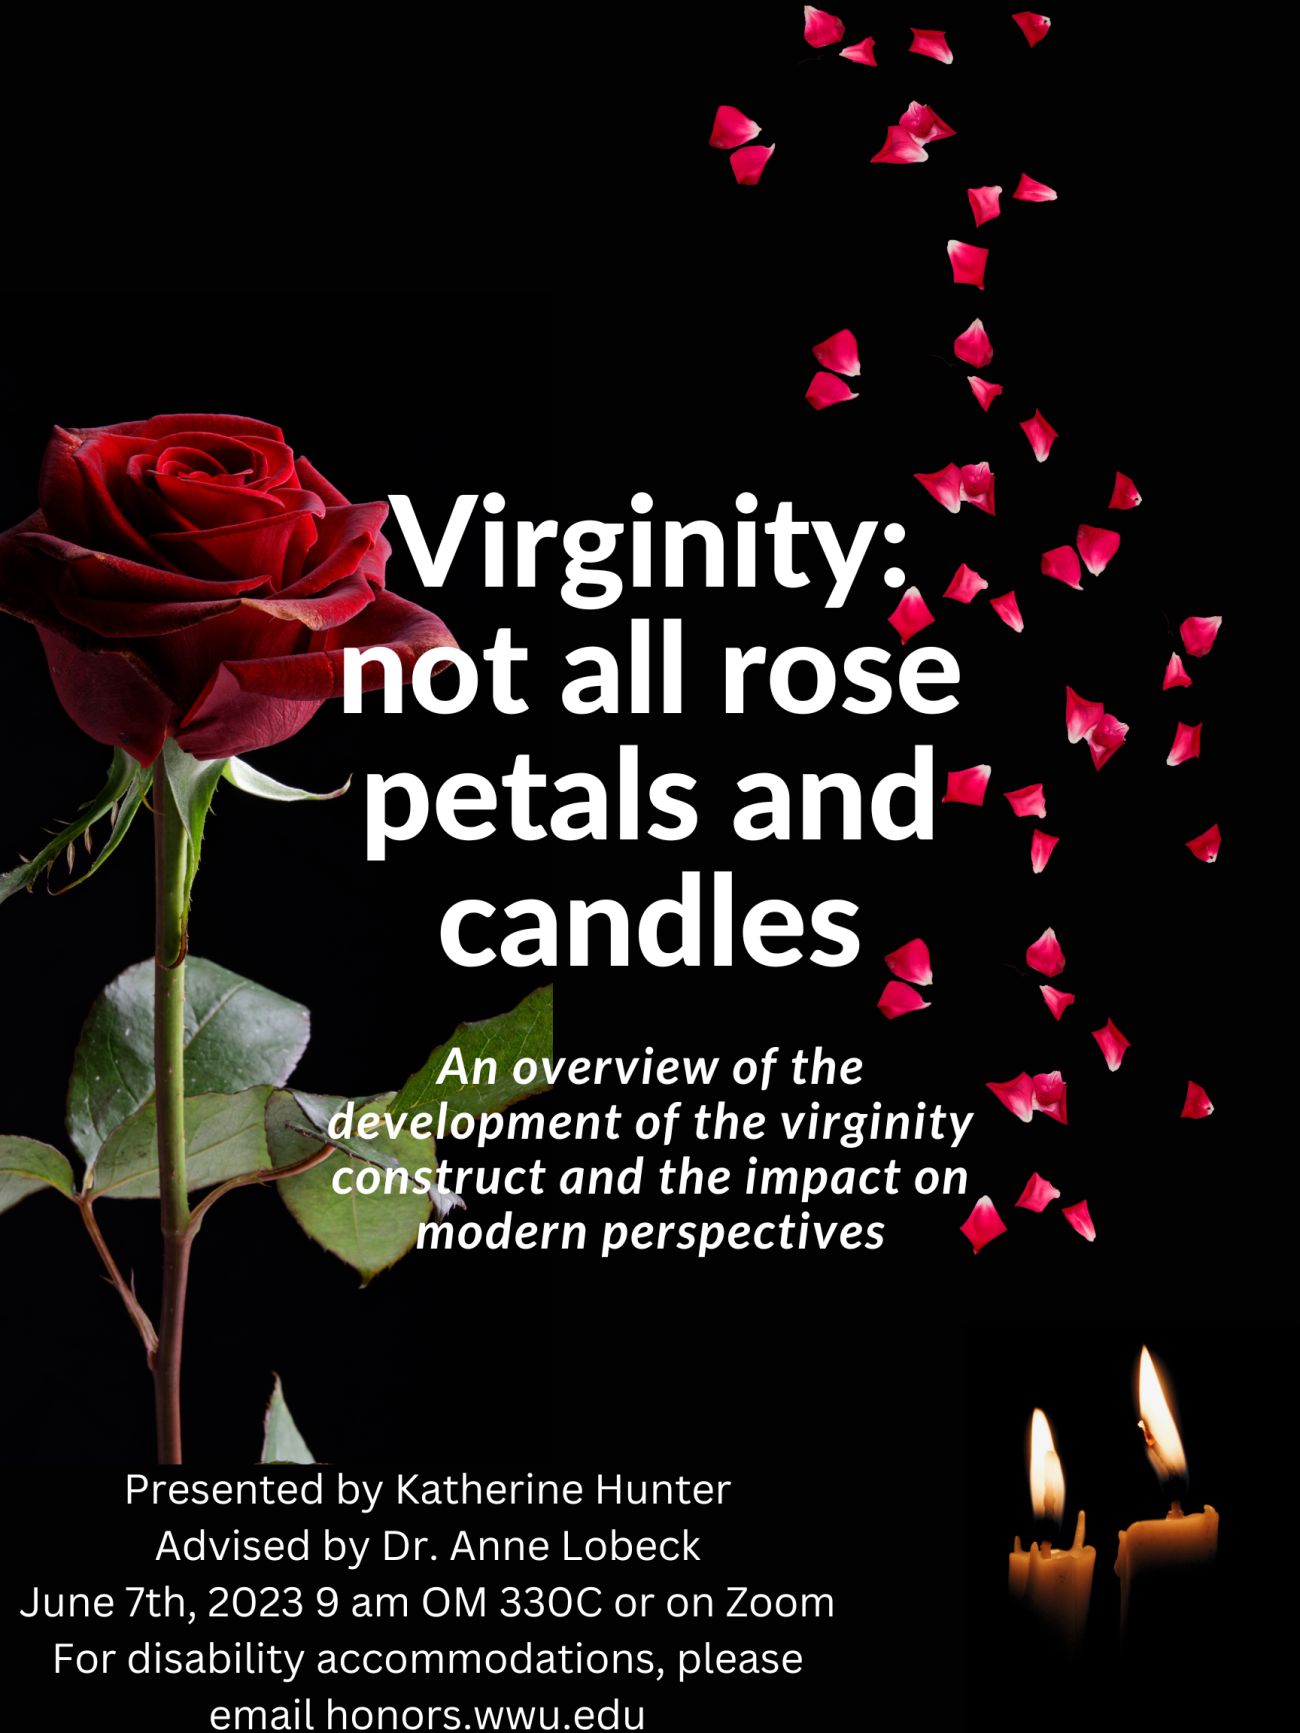 A black poster with a rose on the left and rose petals falling towards candles on the right. Text reads: "Virginity: not all rose petals and candles. An overview of the development of the virginity construct and the impact on modern perspectives. Presented by Katherine Hunter, Advised by Dr. Anne Lobeck. June 7, 2023 9 am OM330C or on Zoom. For disability accommodations, please email honors@wwu.edu."